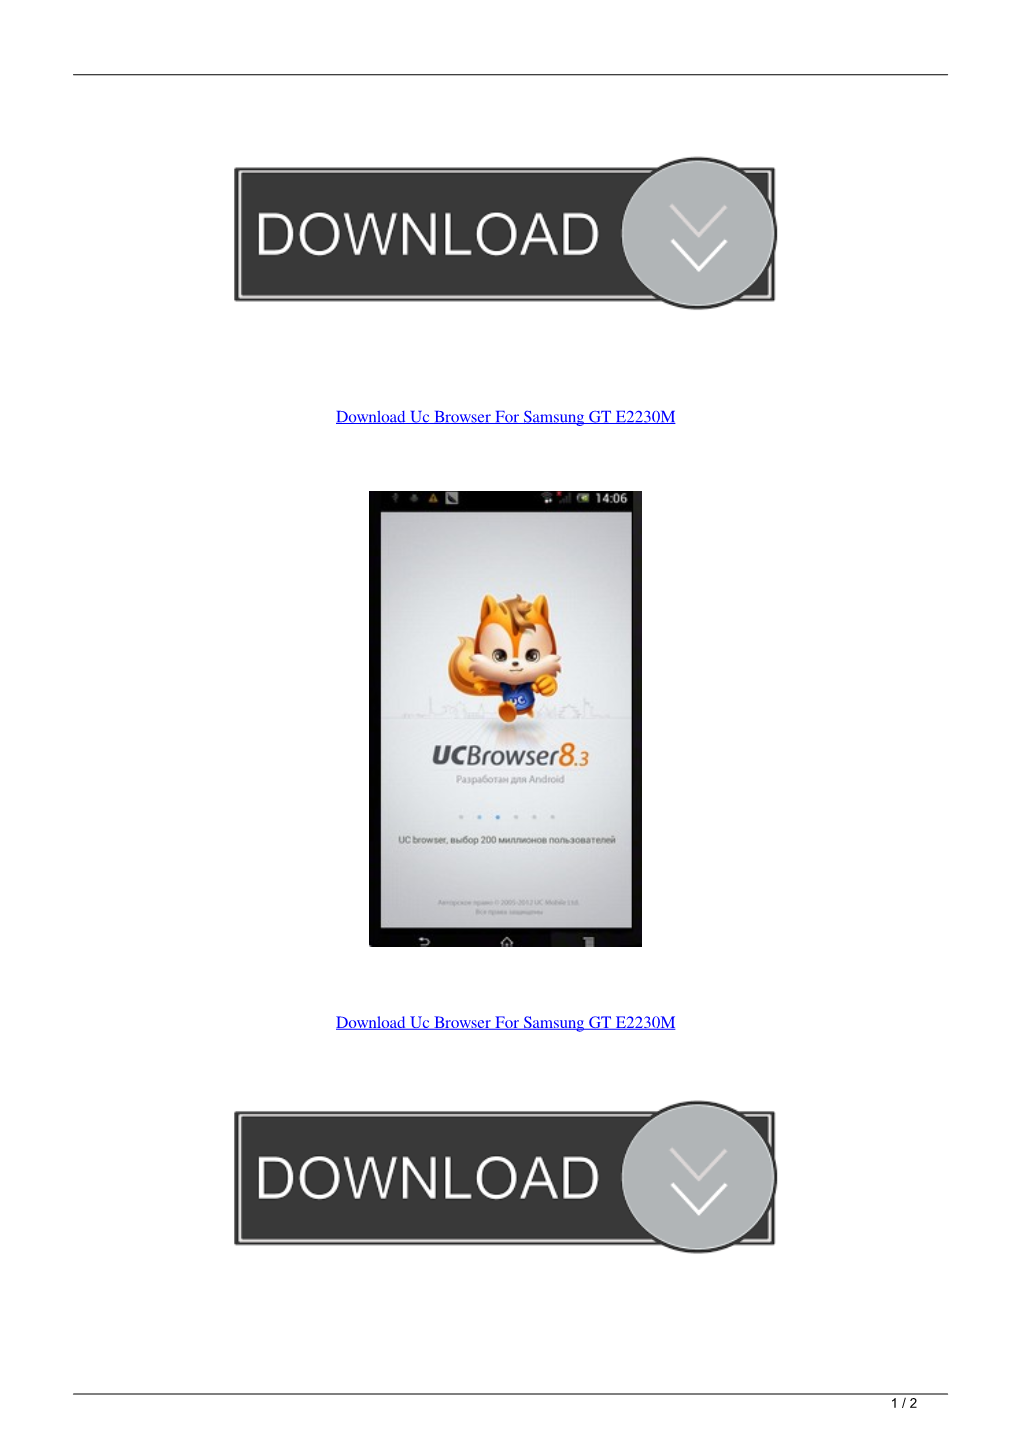 Download Uc Browser for Samsung GT E2230M